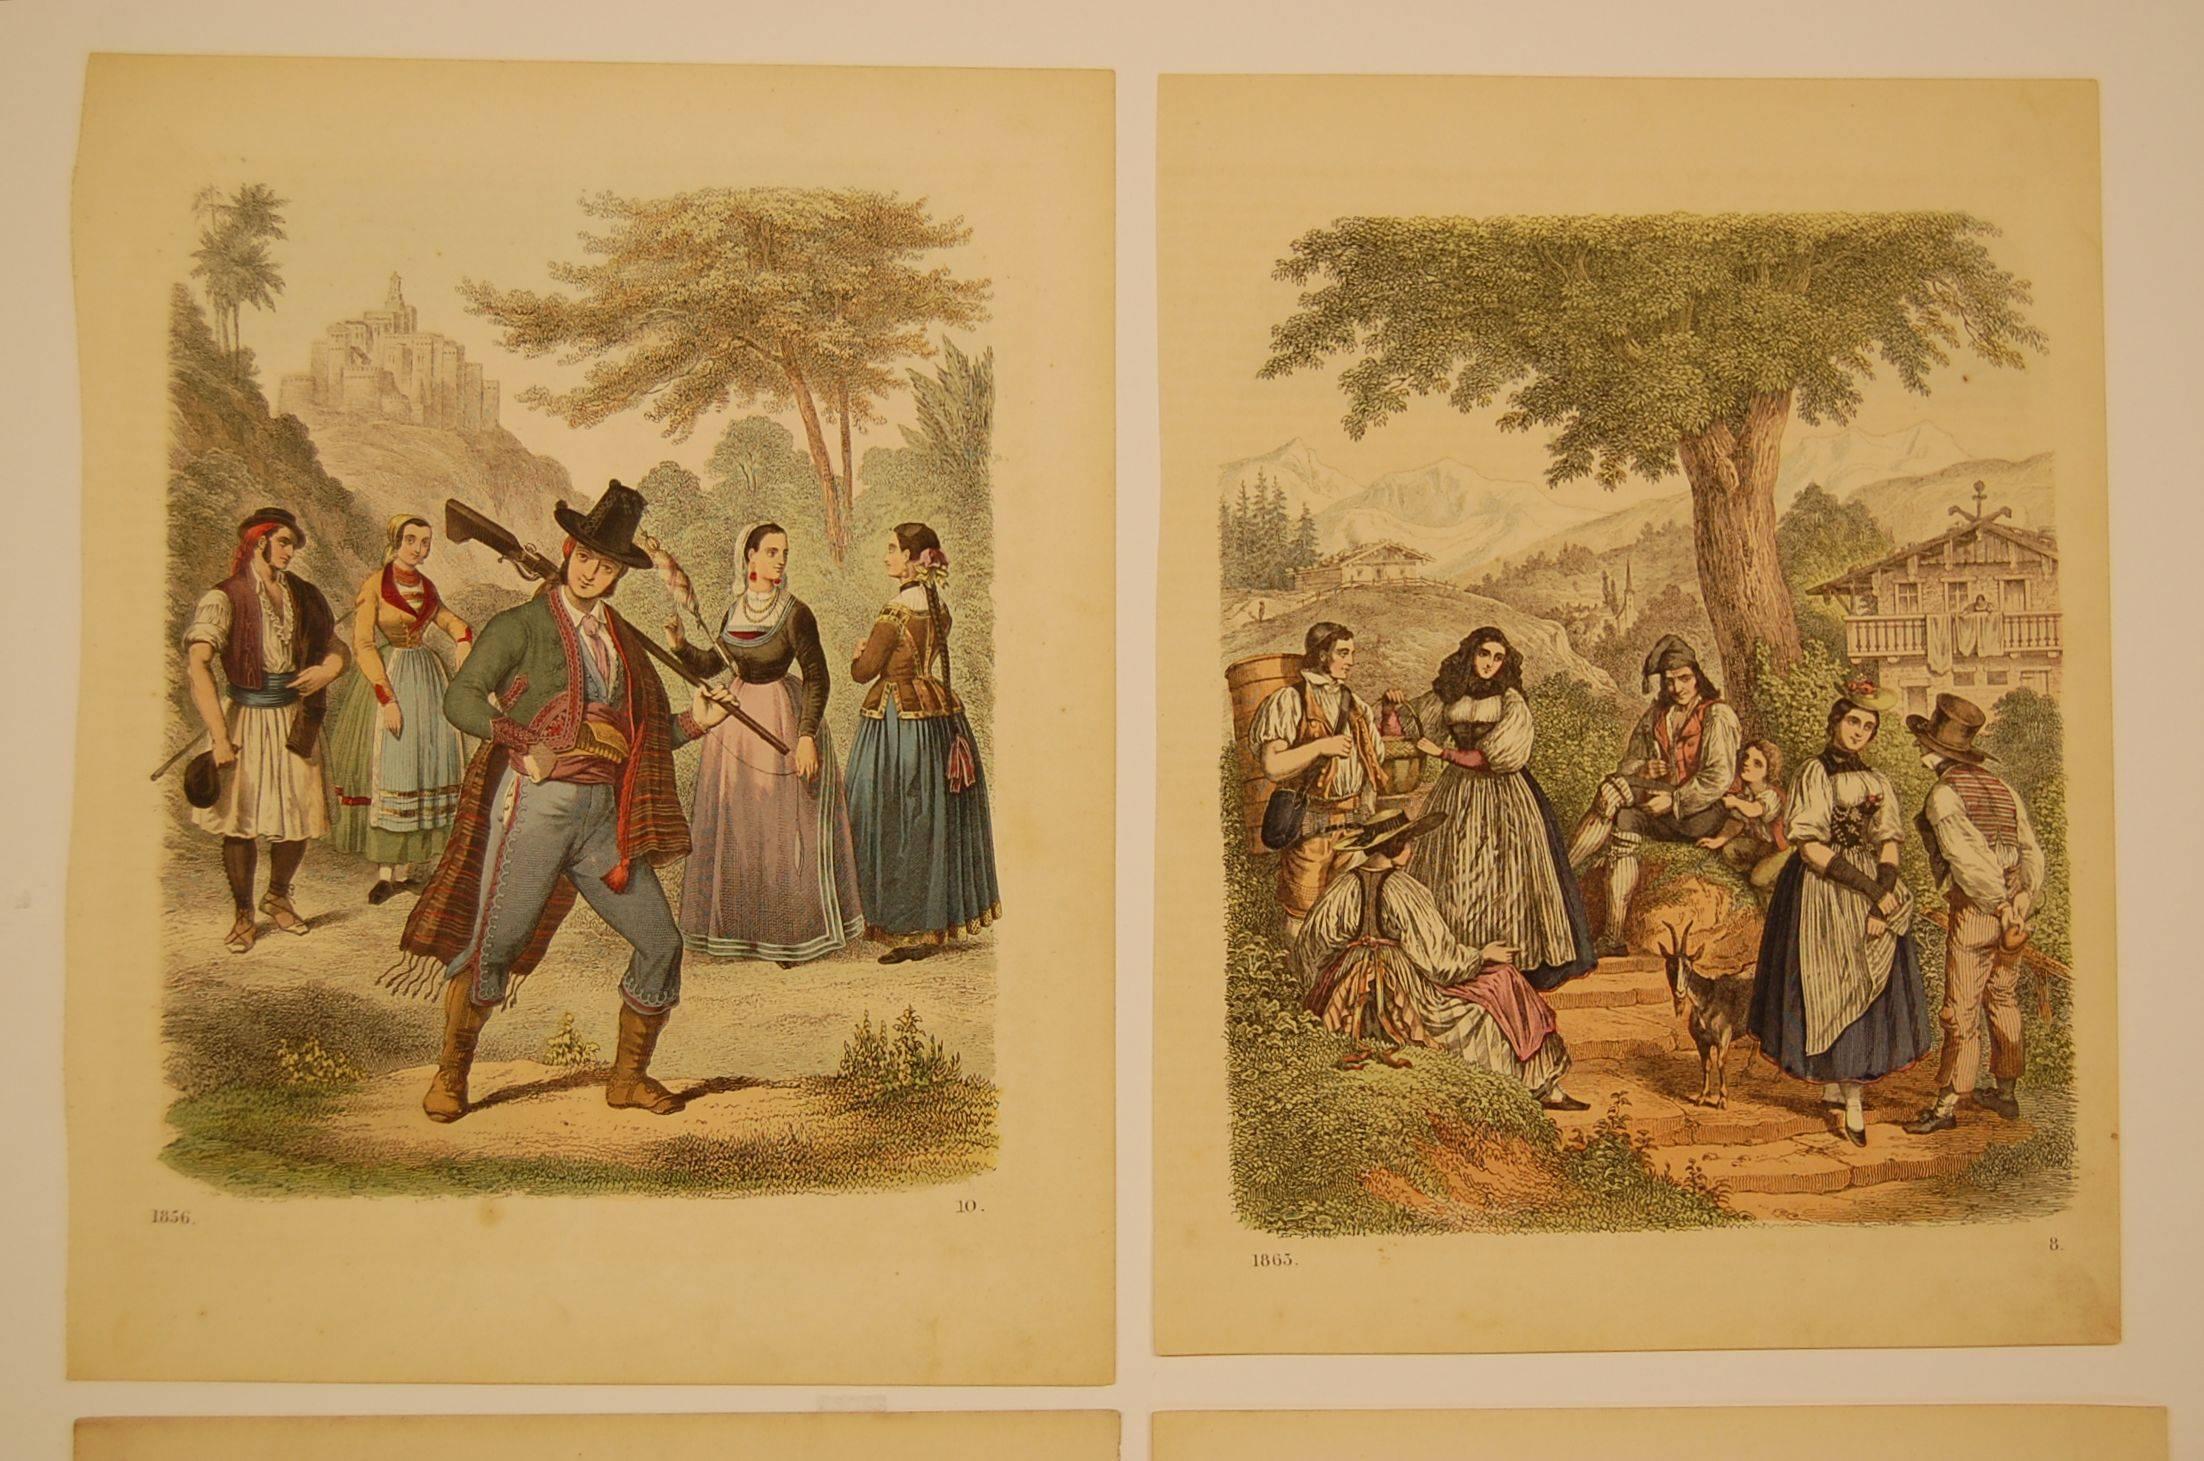 Four nationality costume prints in excellent condition, measures 7.75 inches x 10 inches